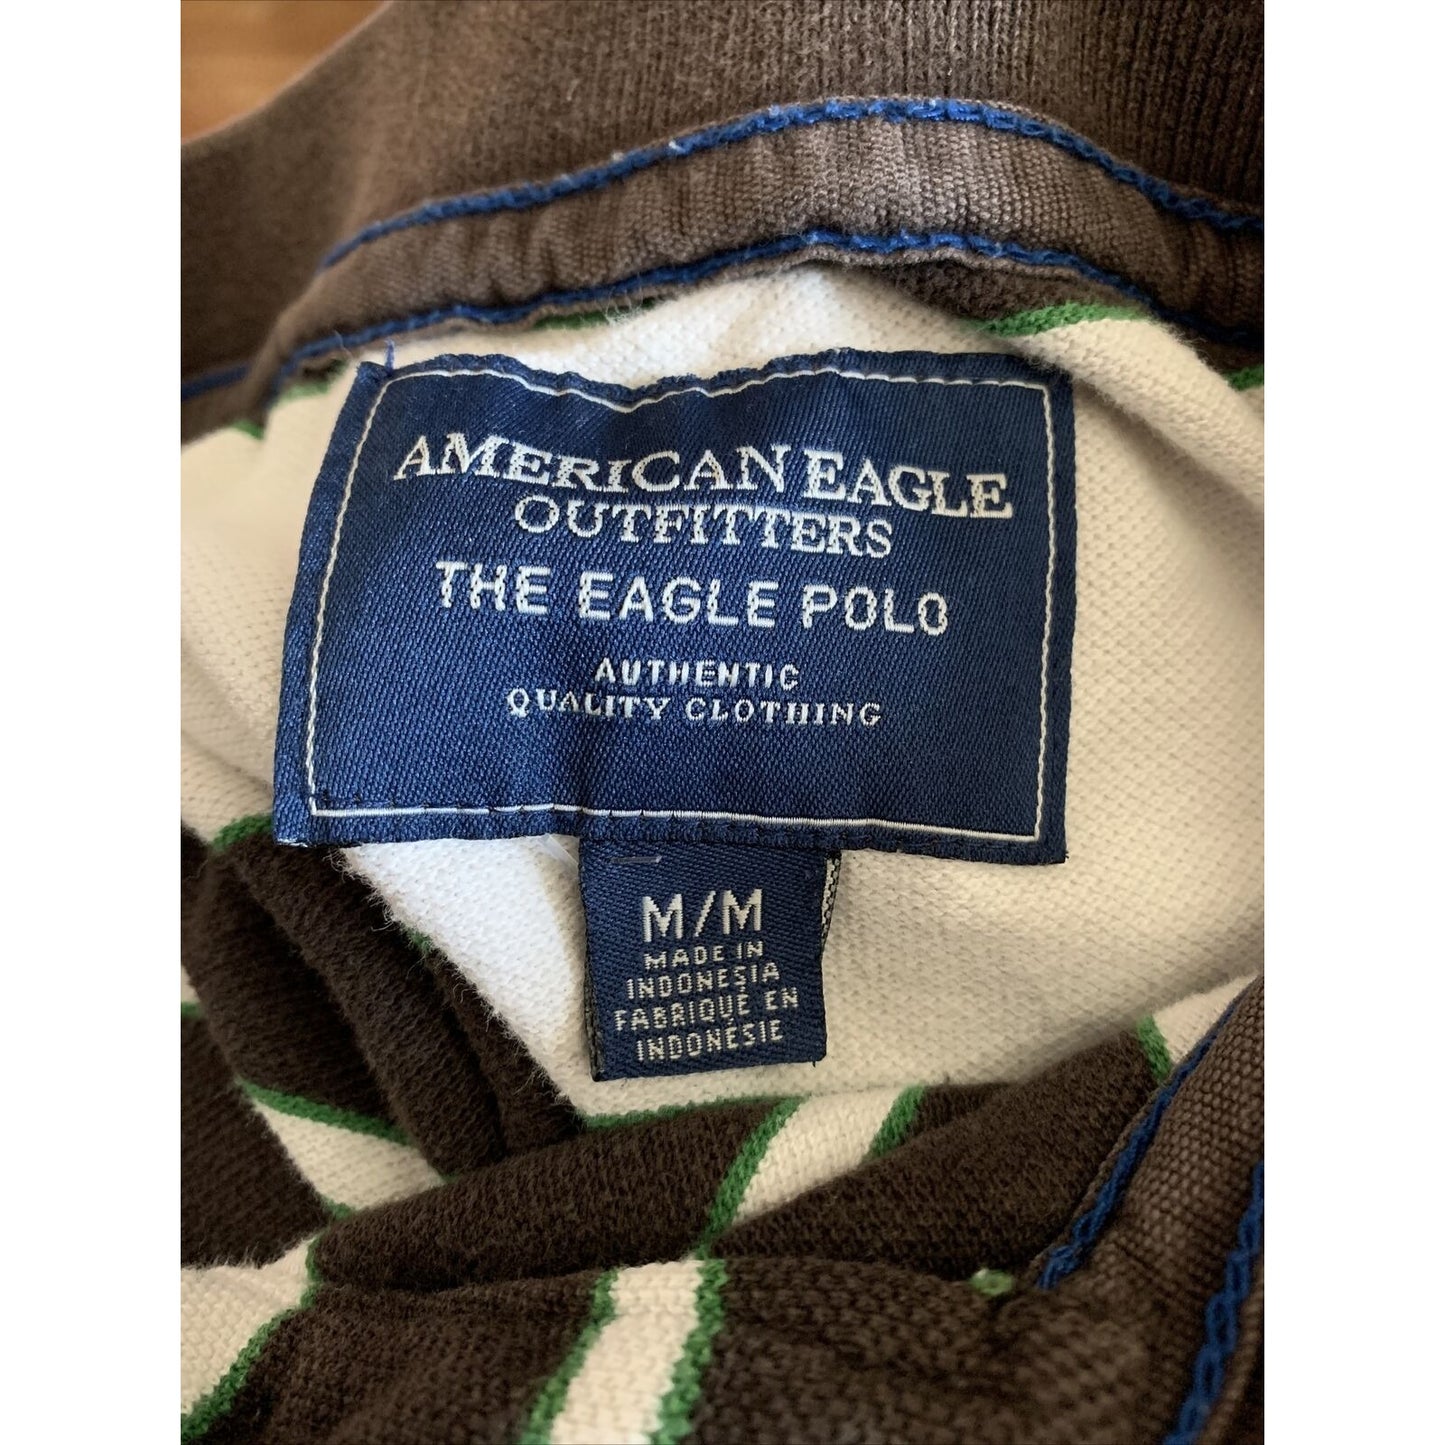 American Eagle Outfitters men's Polo size M short sleeve